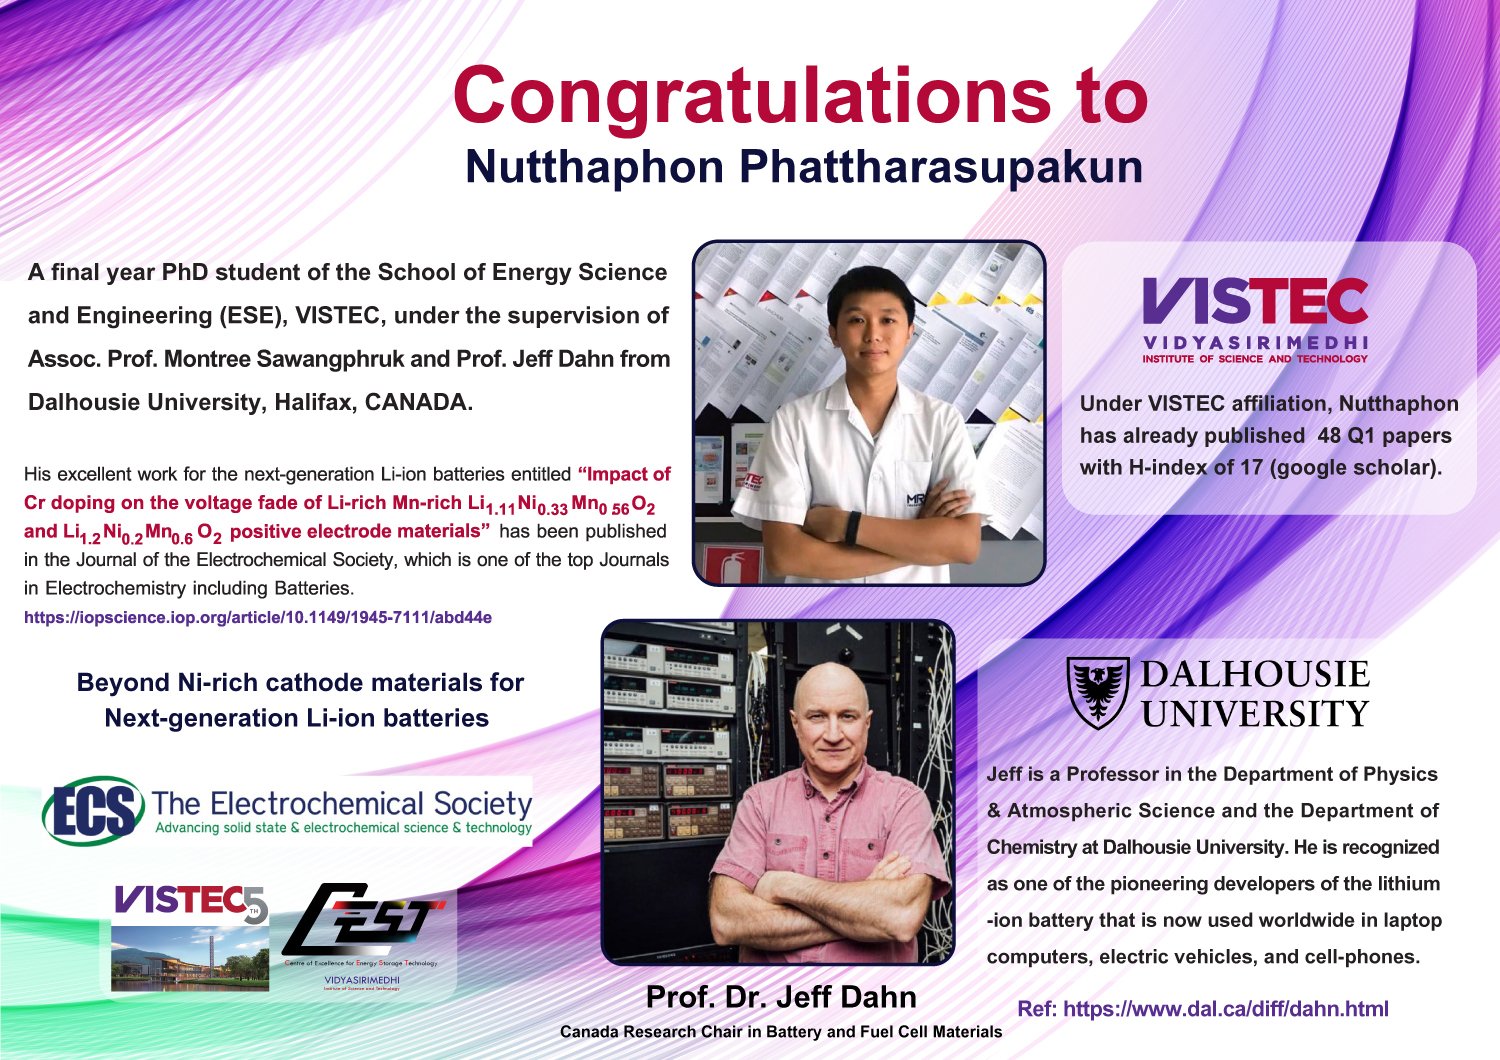 Congratulations to Nutthaphon Phattharasupakun and his team!